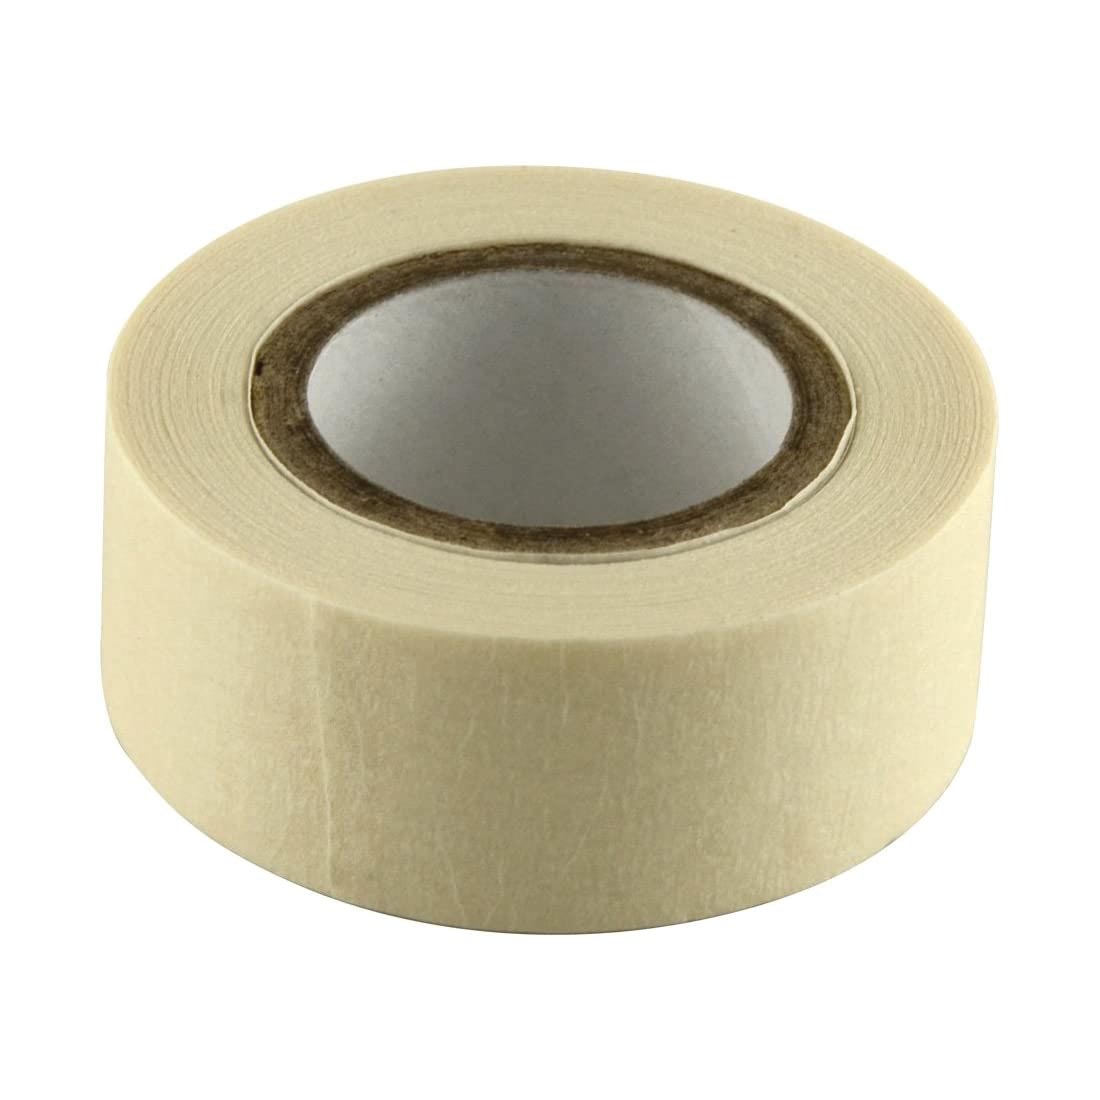 Roll of White Drafting Tape